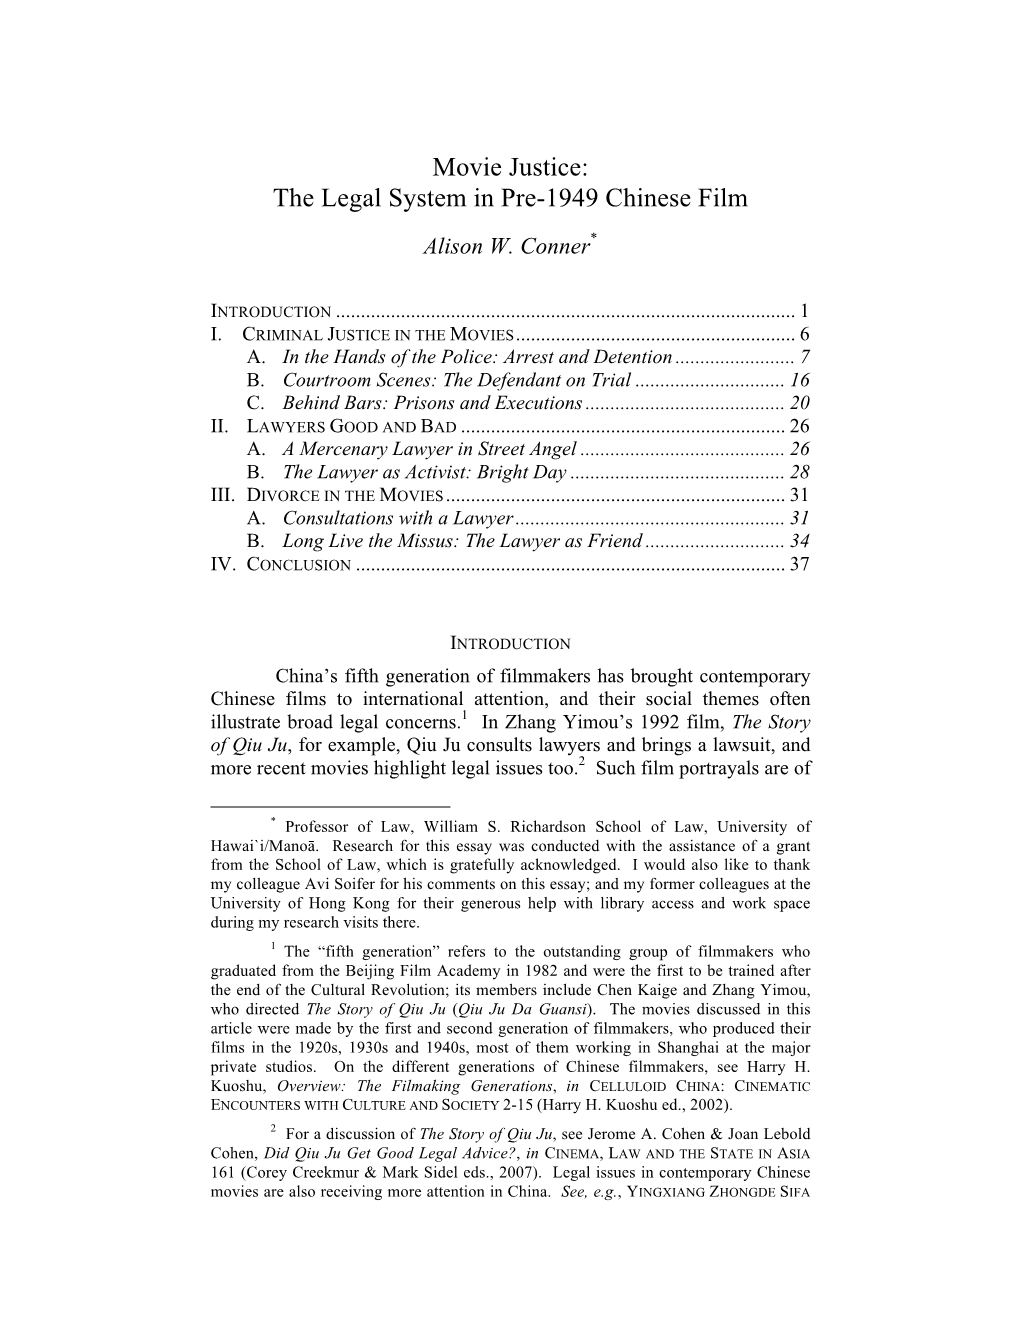 Movie Justice: the Legal System in Pre-1949 Chinese Film